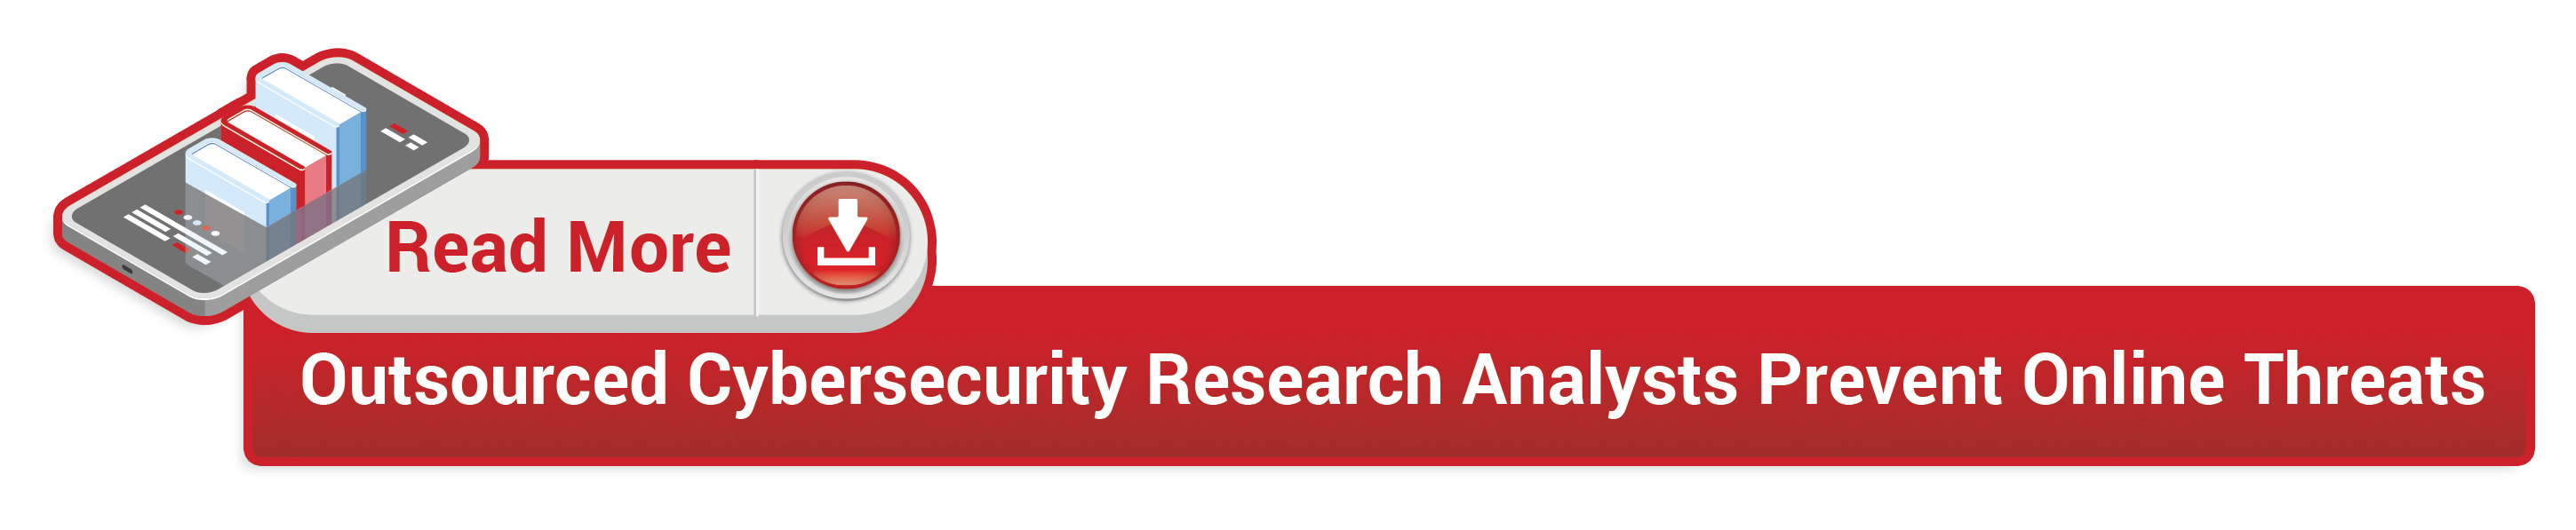 Infinit-O Blog Cybersecurity Research Analysts Outsourcing